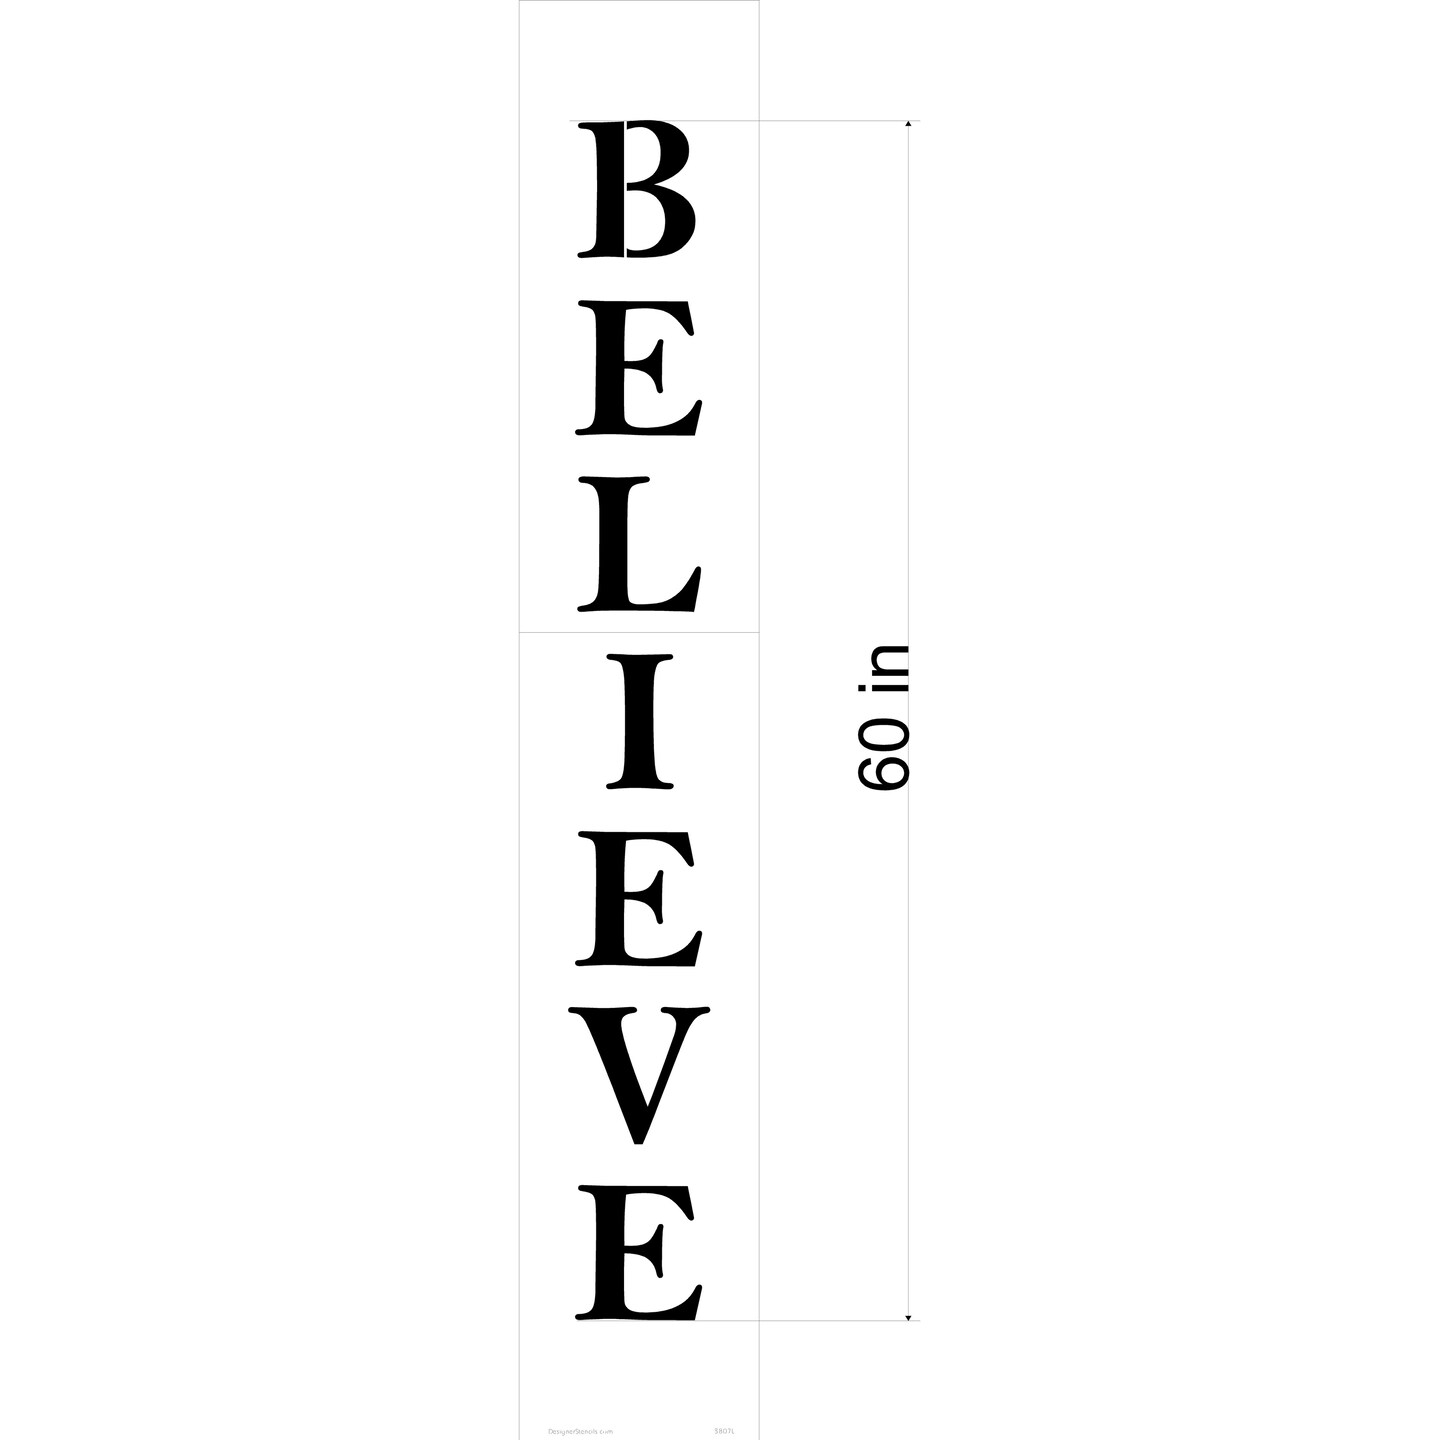 60-Inch Believe Tall Wall Stencil | 3807L by Designer Stencils | Word &#x26; Phrase Stencils | Reusable Art Craft Stencils for Painting on Walls, Canvas, Wood | Reusable Plastic Paint Stencil for Home Makeover | Easy to Use &#x26; Clean Art Stencil